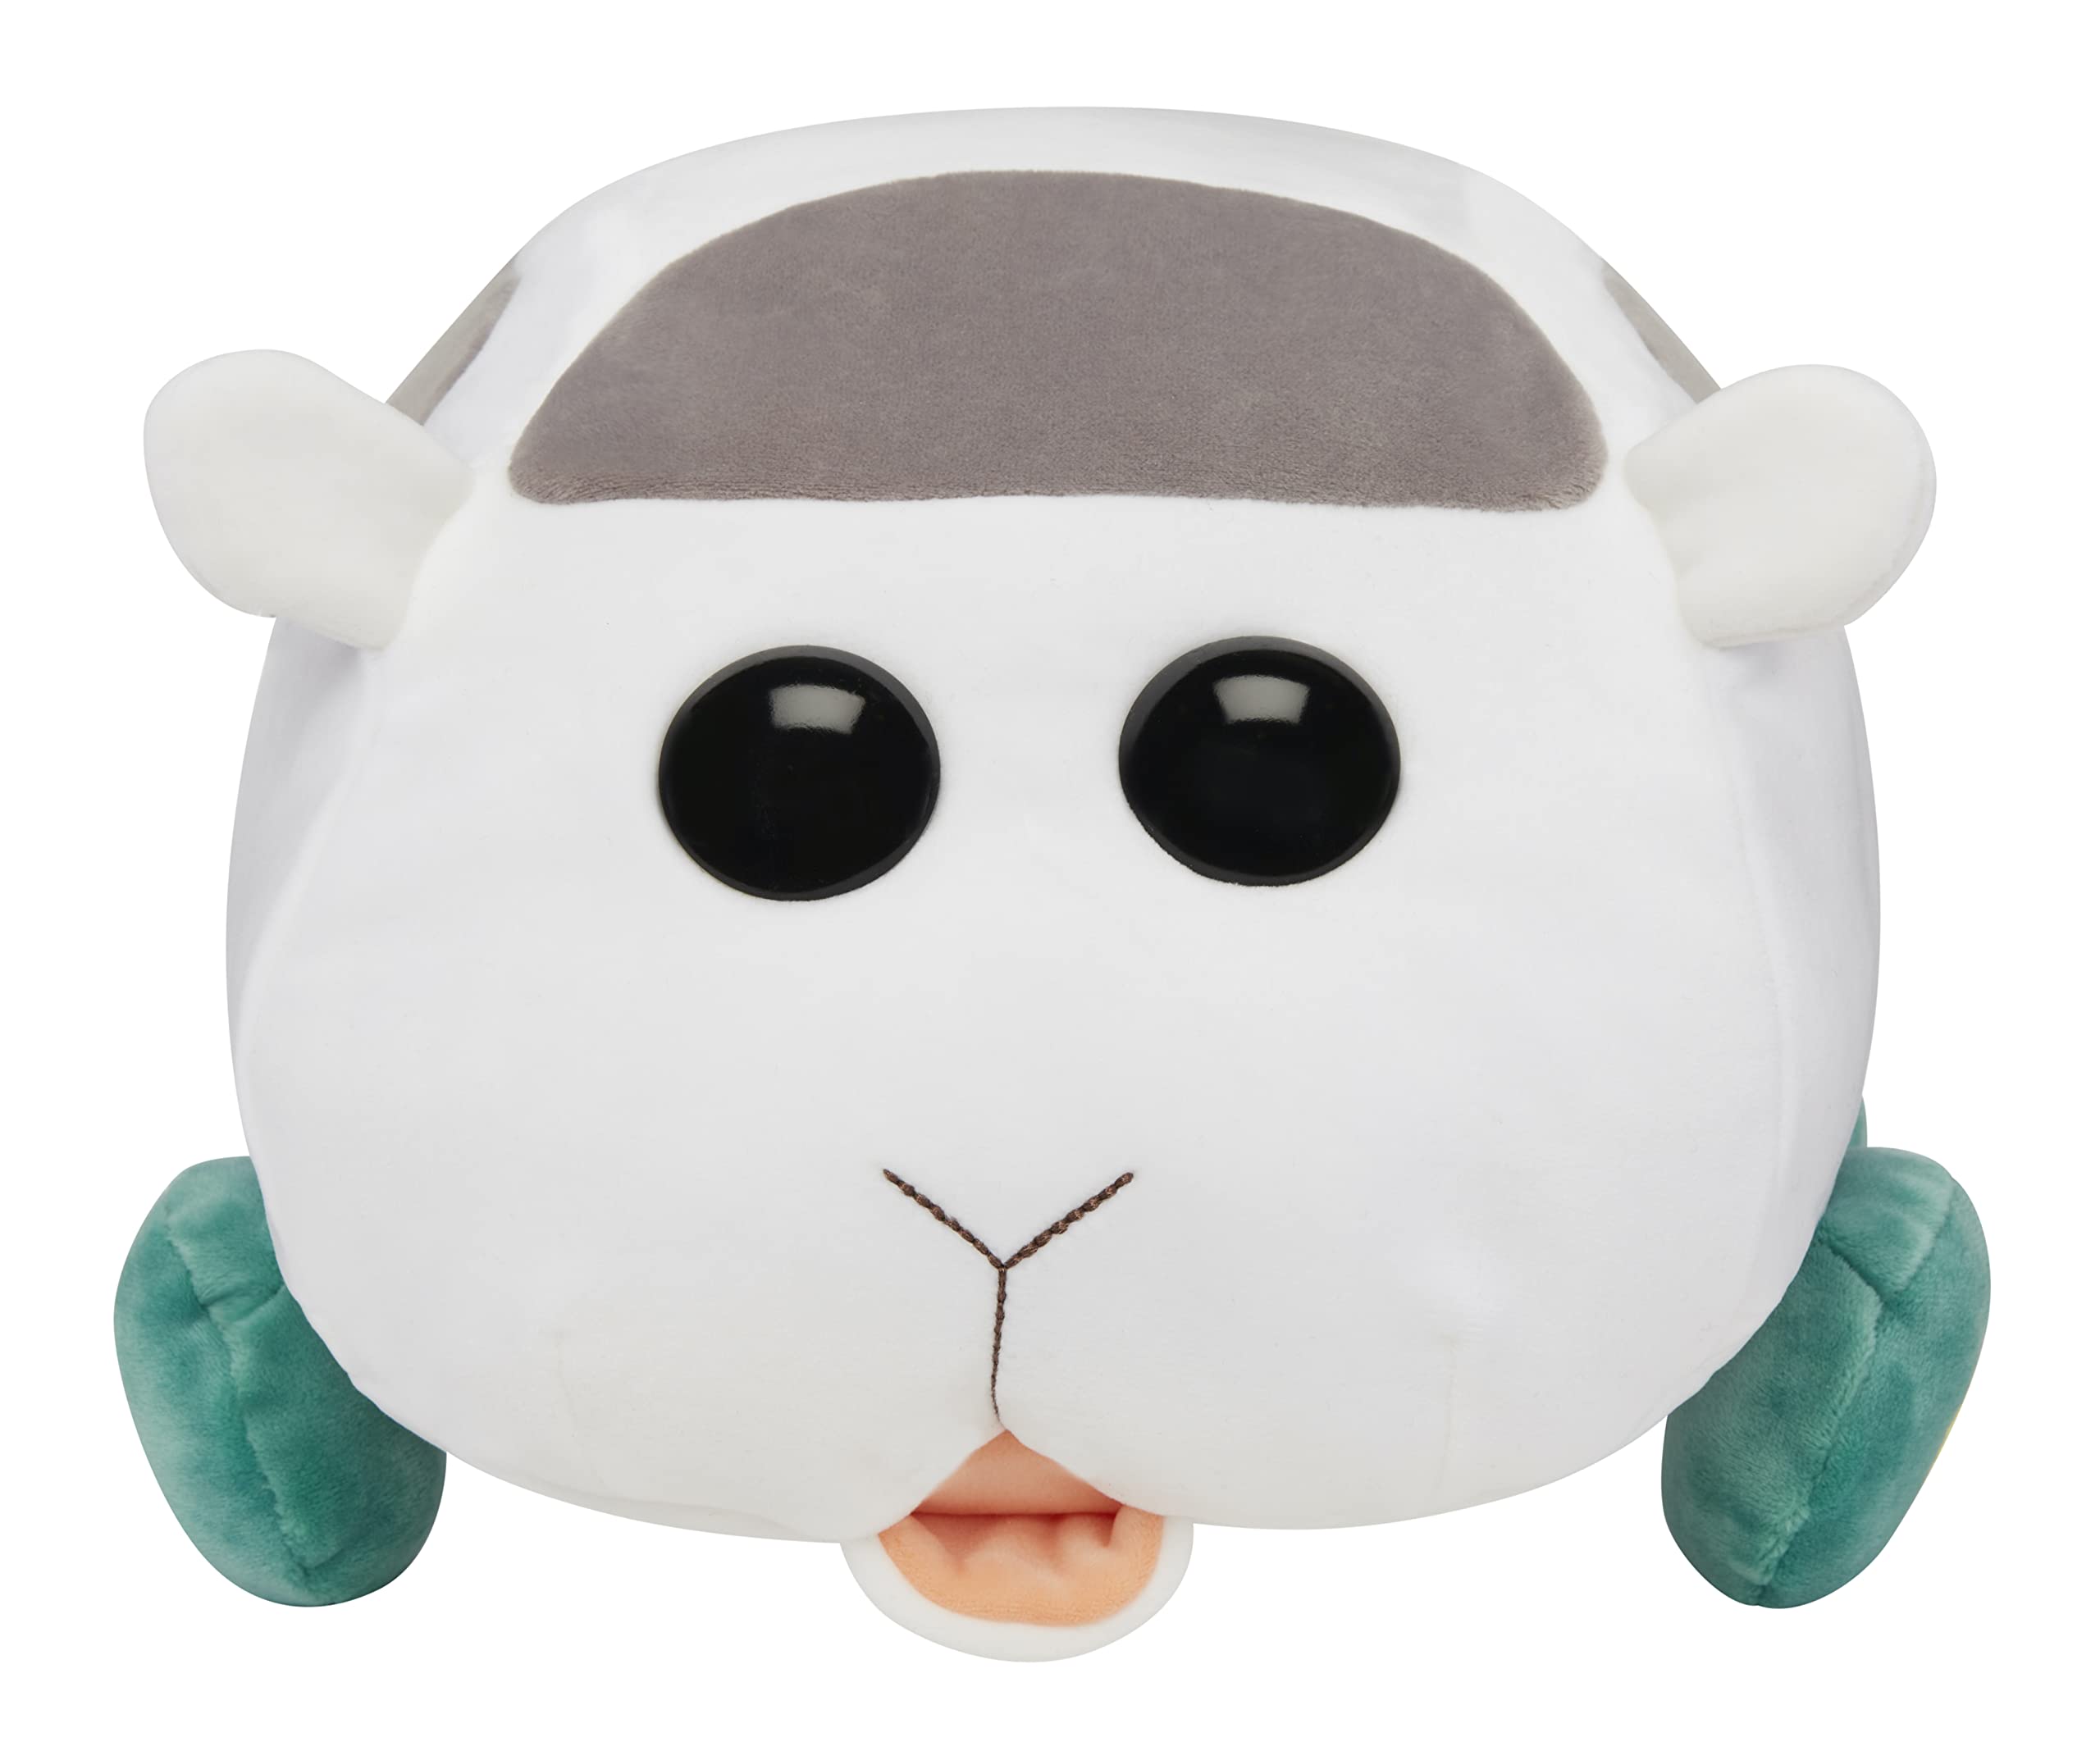 11" MGA Entertainment Pui Pui Molcar Shiromo Plush Toy $3.88 + Free Shipping w/ Prime or on orders over $35